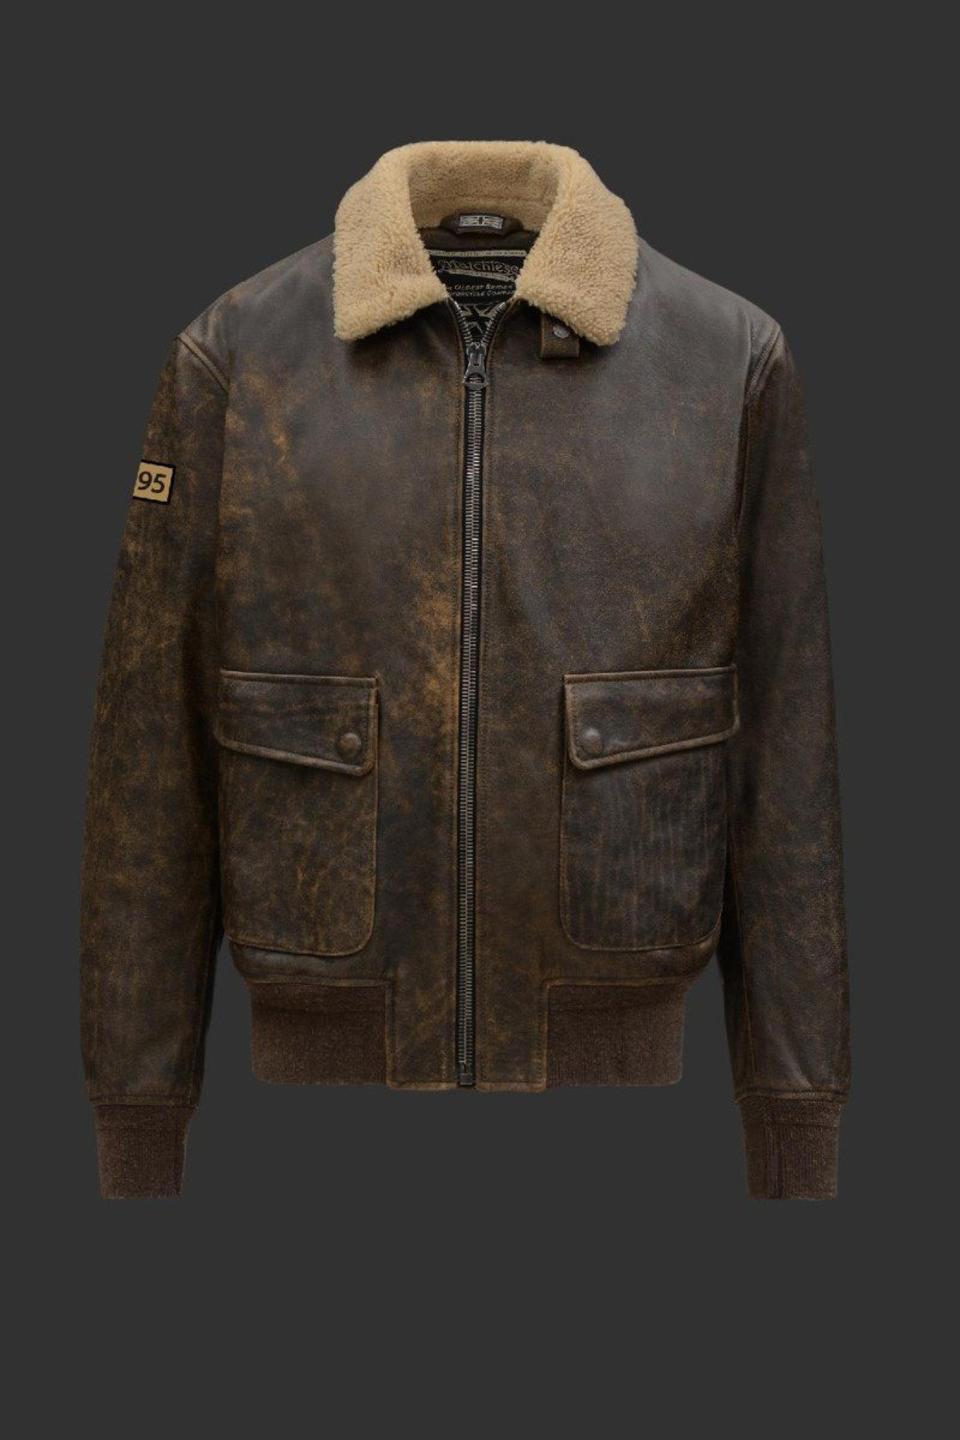 The Putin-inspired leather jacket by Matchless London